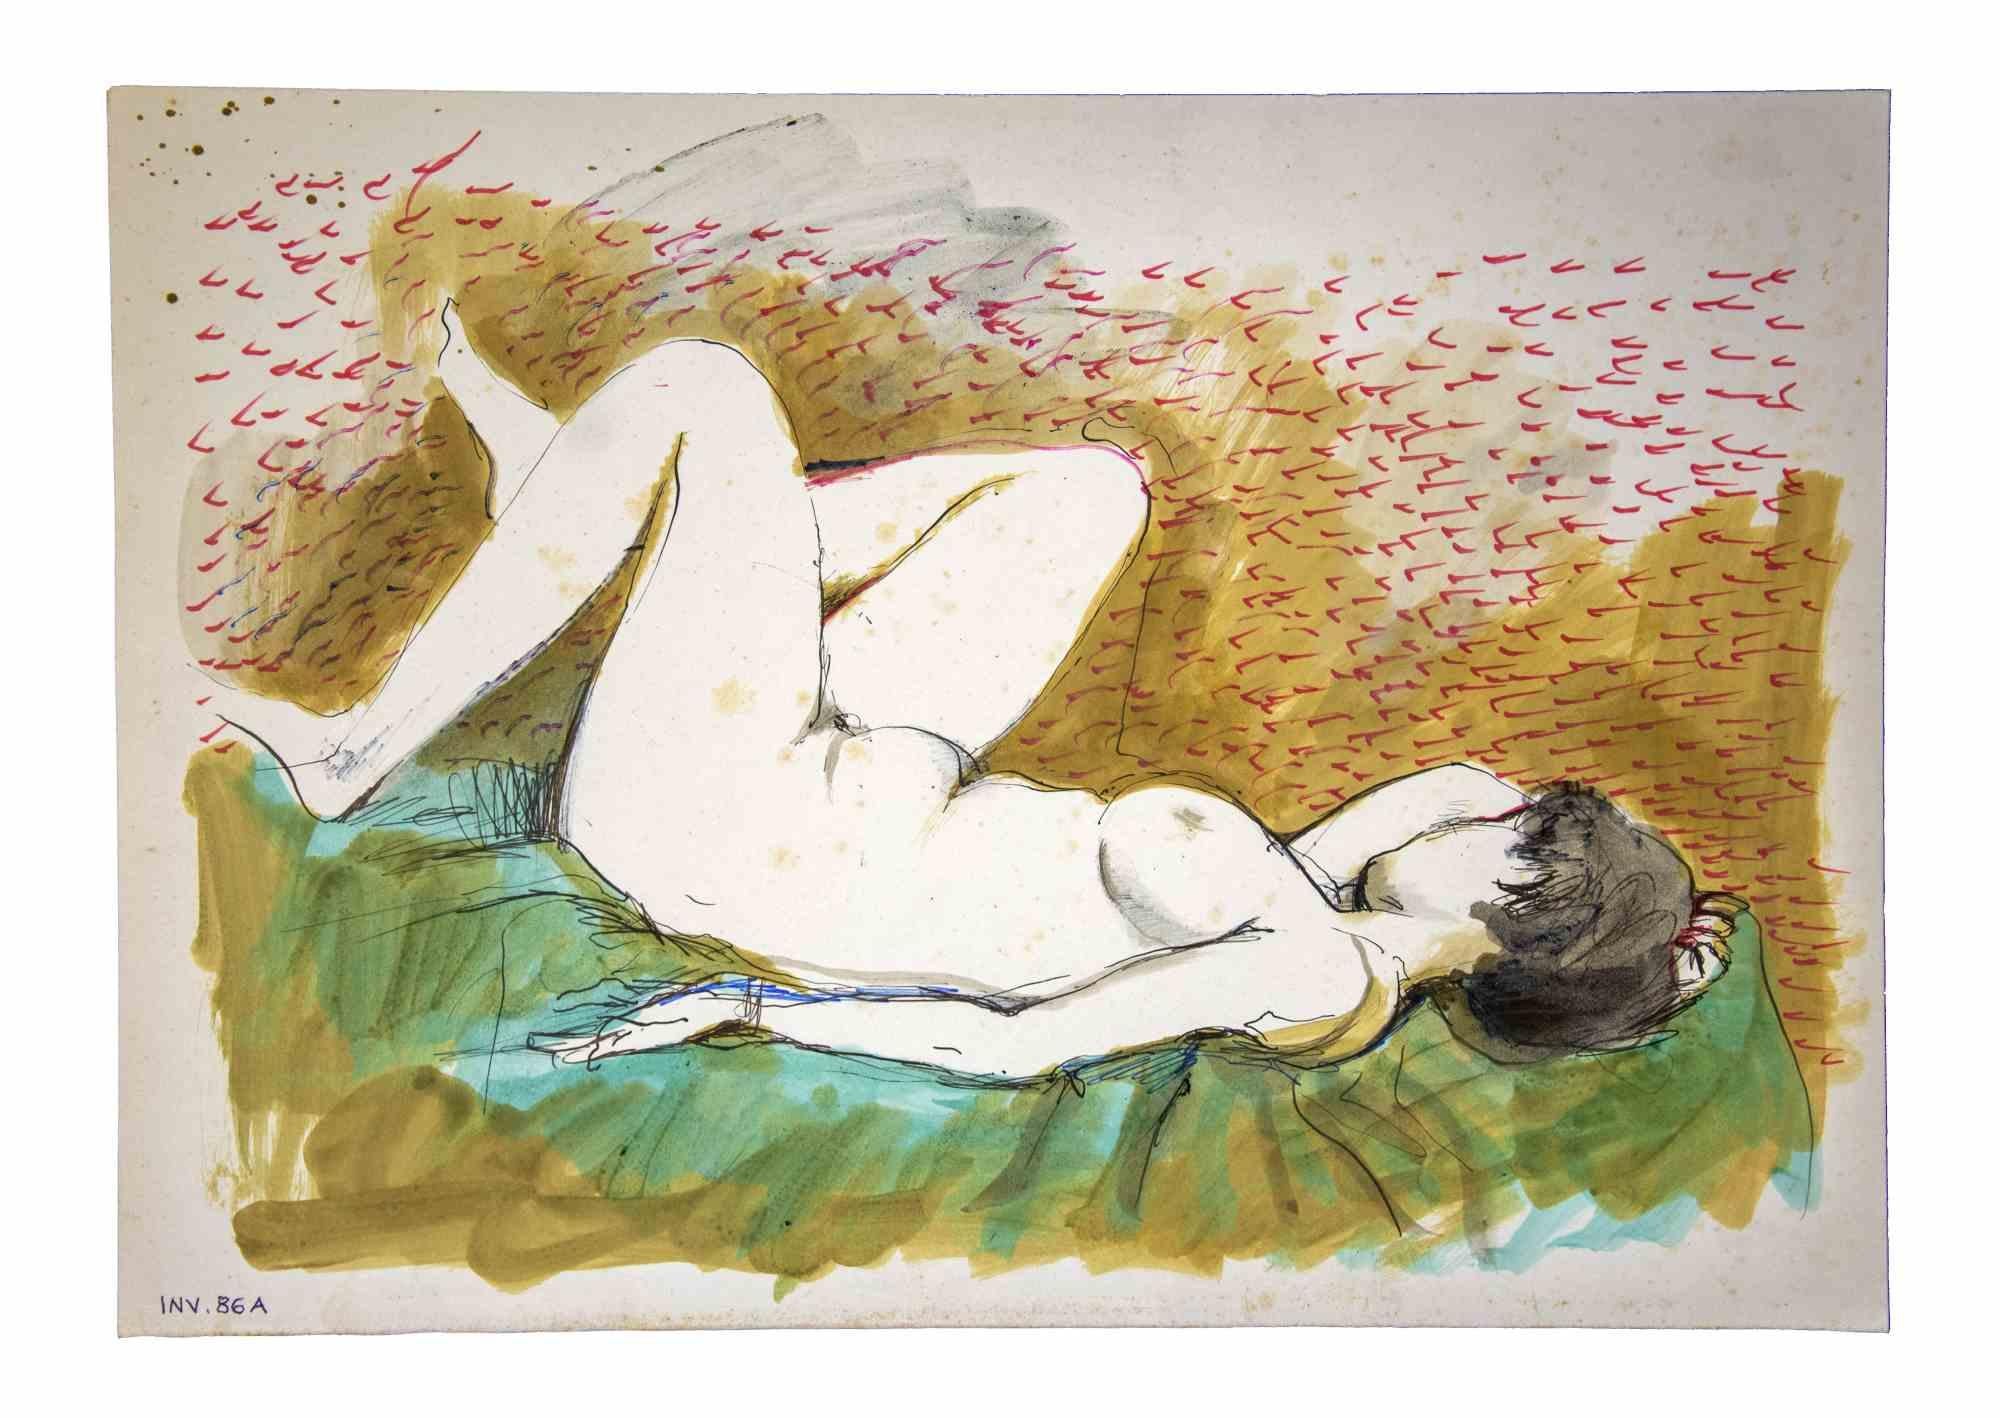 Female Figure is an original artwork realized in the 1970s by the Italian Contemporary artist  Leo Guida  (1992 - 2017).

Original drawings in china ink and Watercolor on paper.

Good conditions but aged.

The artwork is depicted through strong